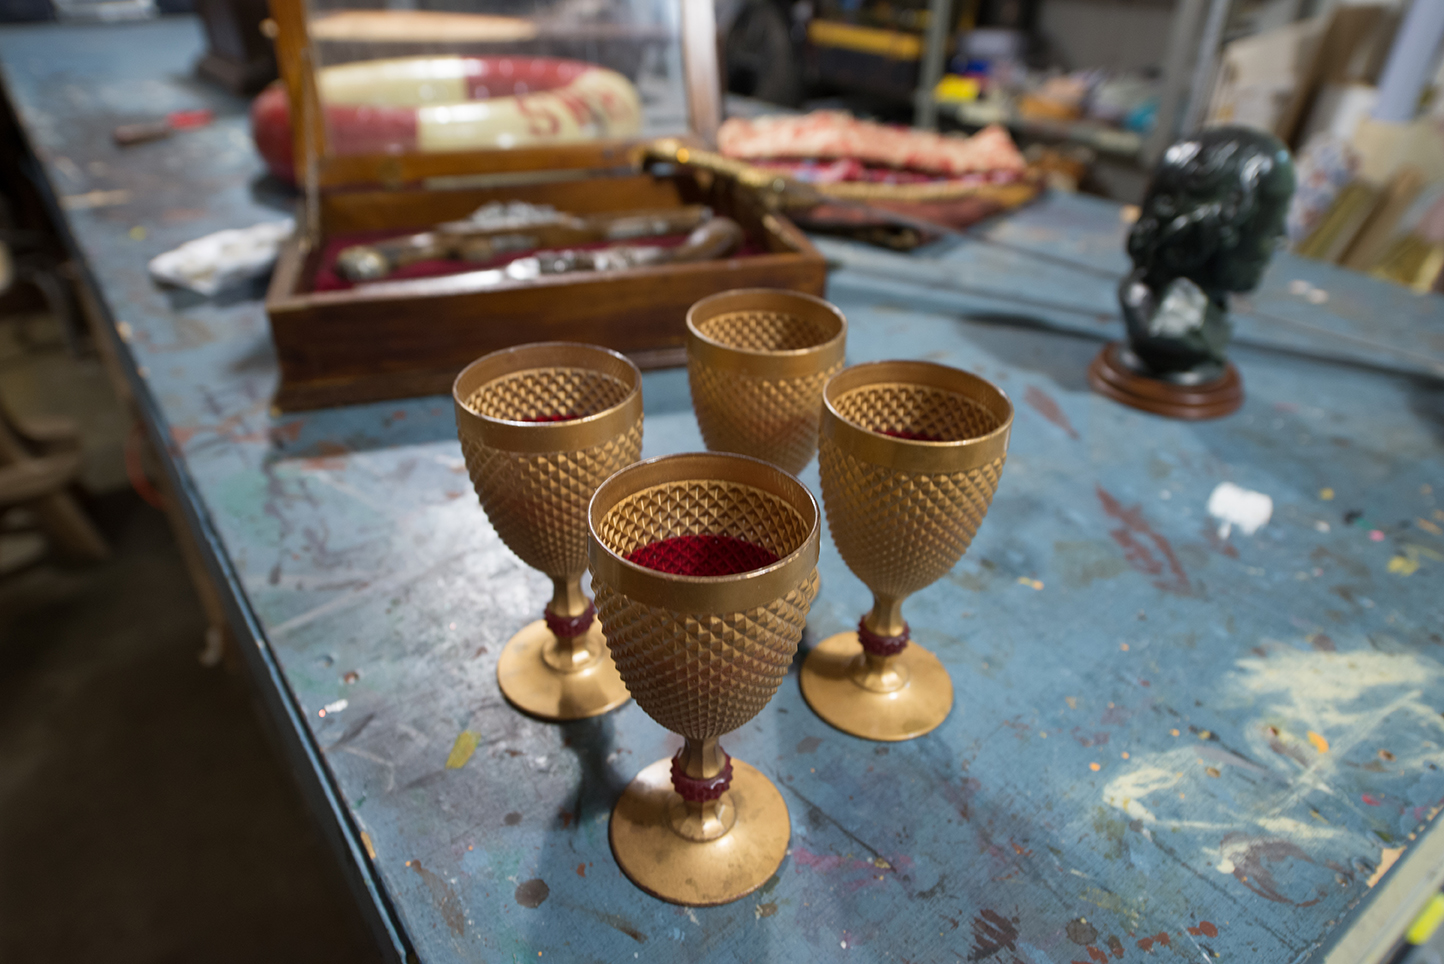 Goblets are a go-to prop for anything Shakespeare, and thus are a favorite for ISF productions. Burge said that opaque goblets are preferred so that it’s easier for actors to pretend they are filled with something other than water. Cheers!